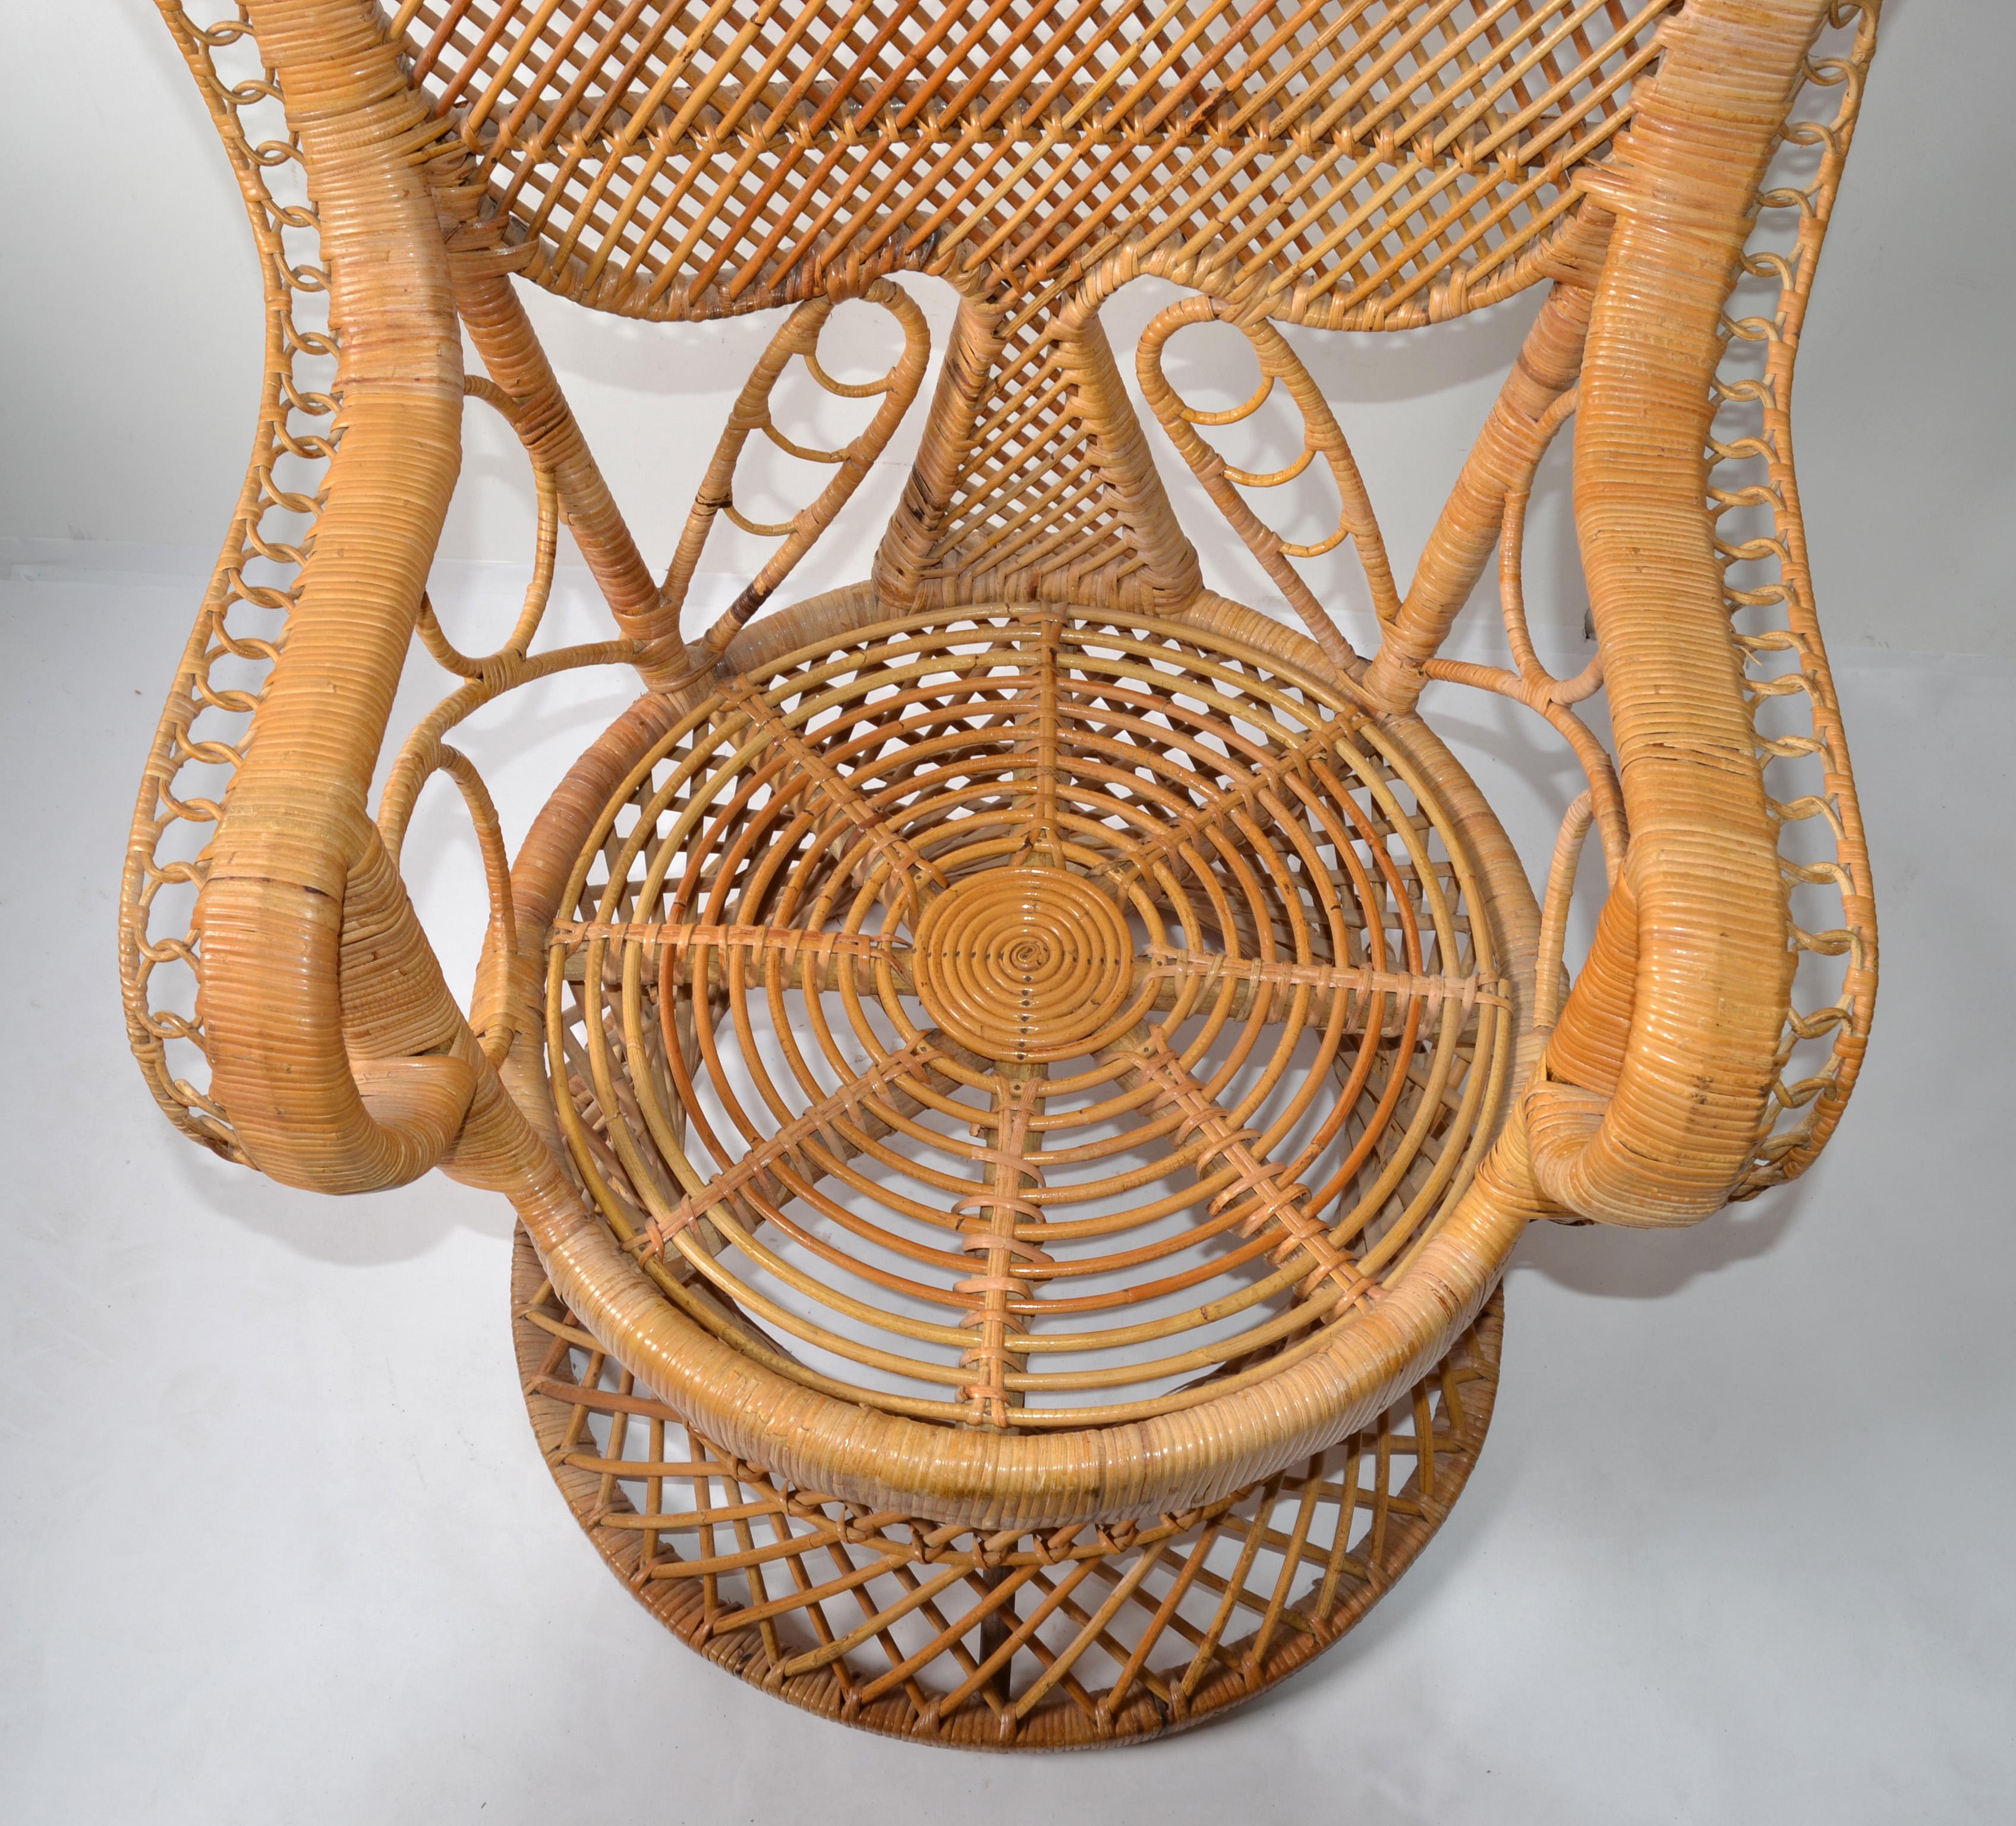 20th Century Coastal Vintage Round Rattan Accent Table Hand-Woven Wicker Caning Peacock Chair For Sale